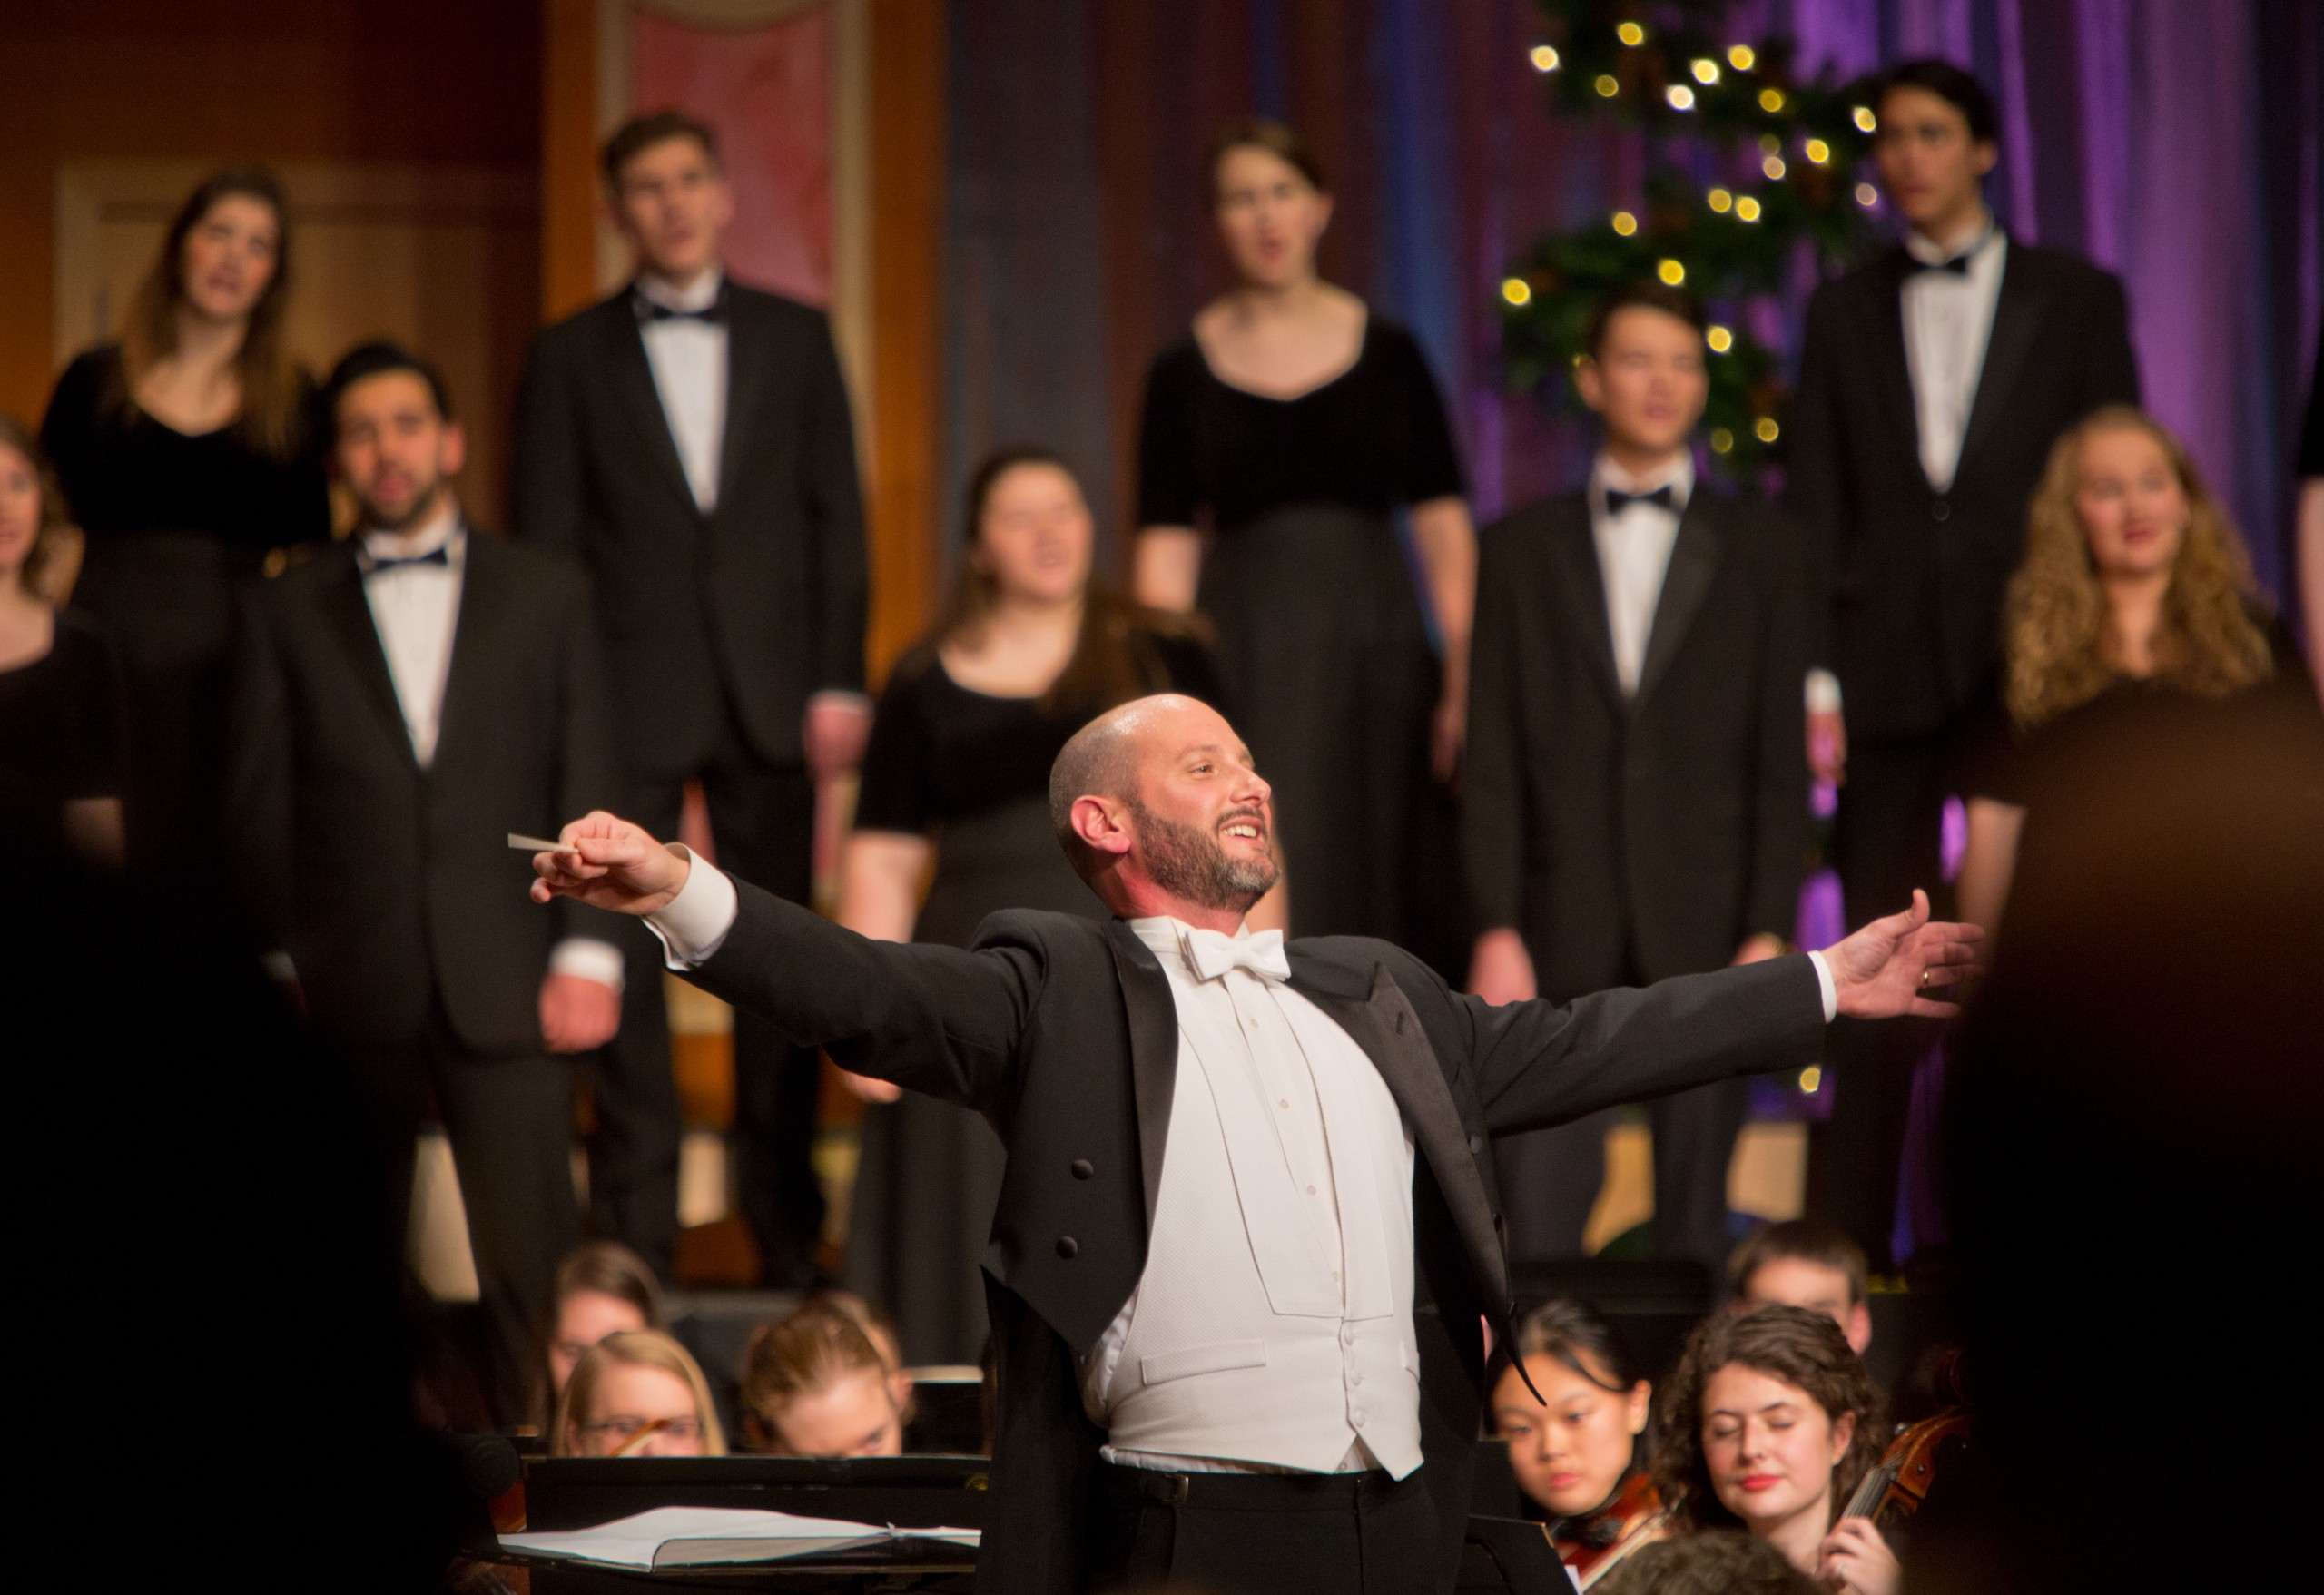 PLU Christmas featuring Angela Meade with the Choir of the West, the University Chorale and the University Orchestra Brian Galante conducting at PLU on Friday, Dec. 11, 2015. (Photo: John Froschauer/PLU)